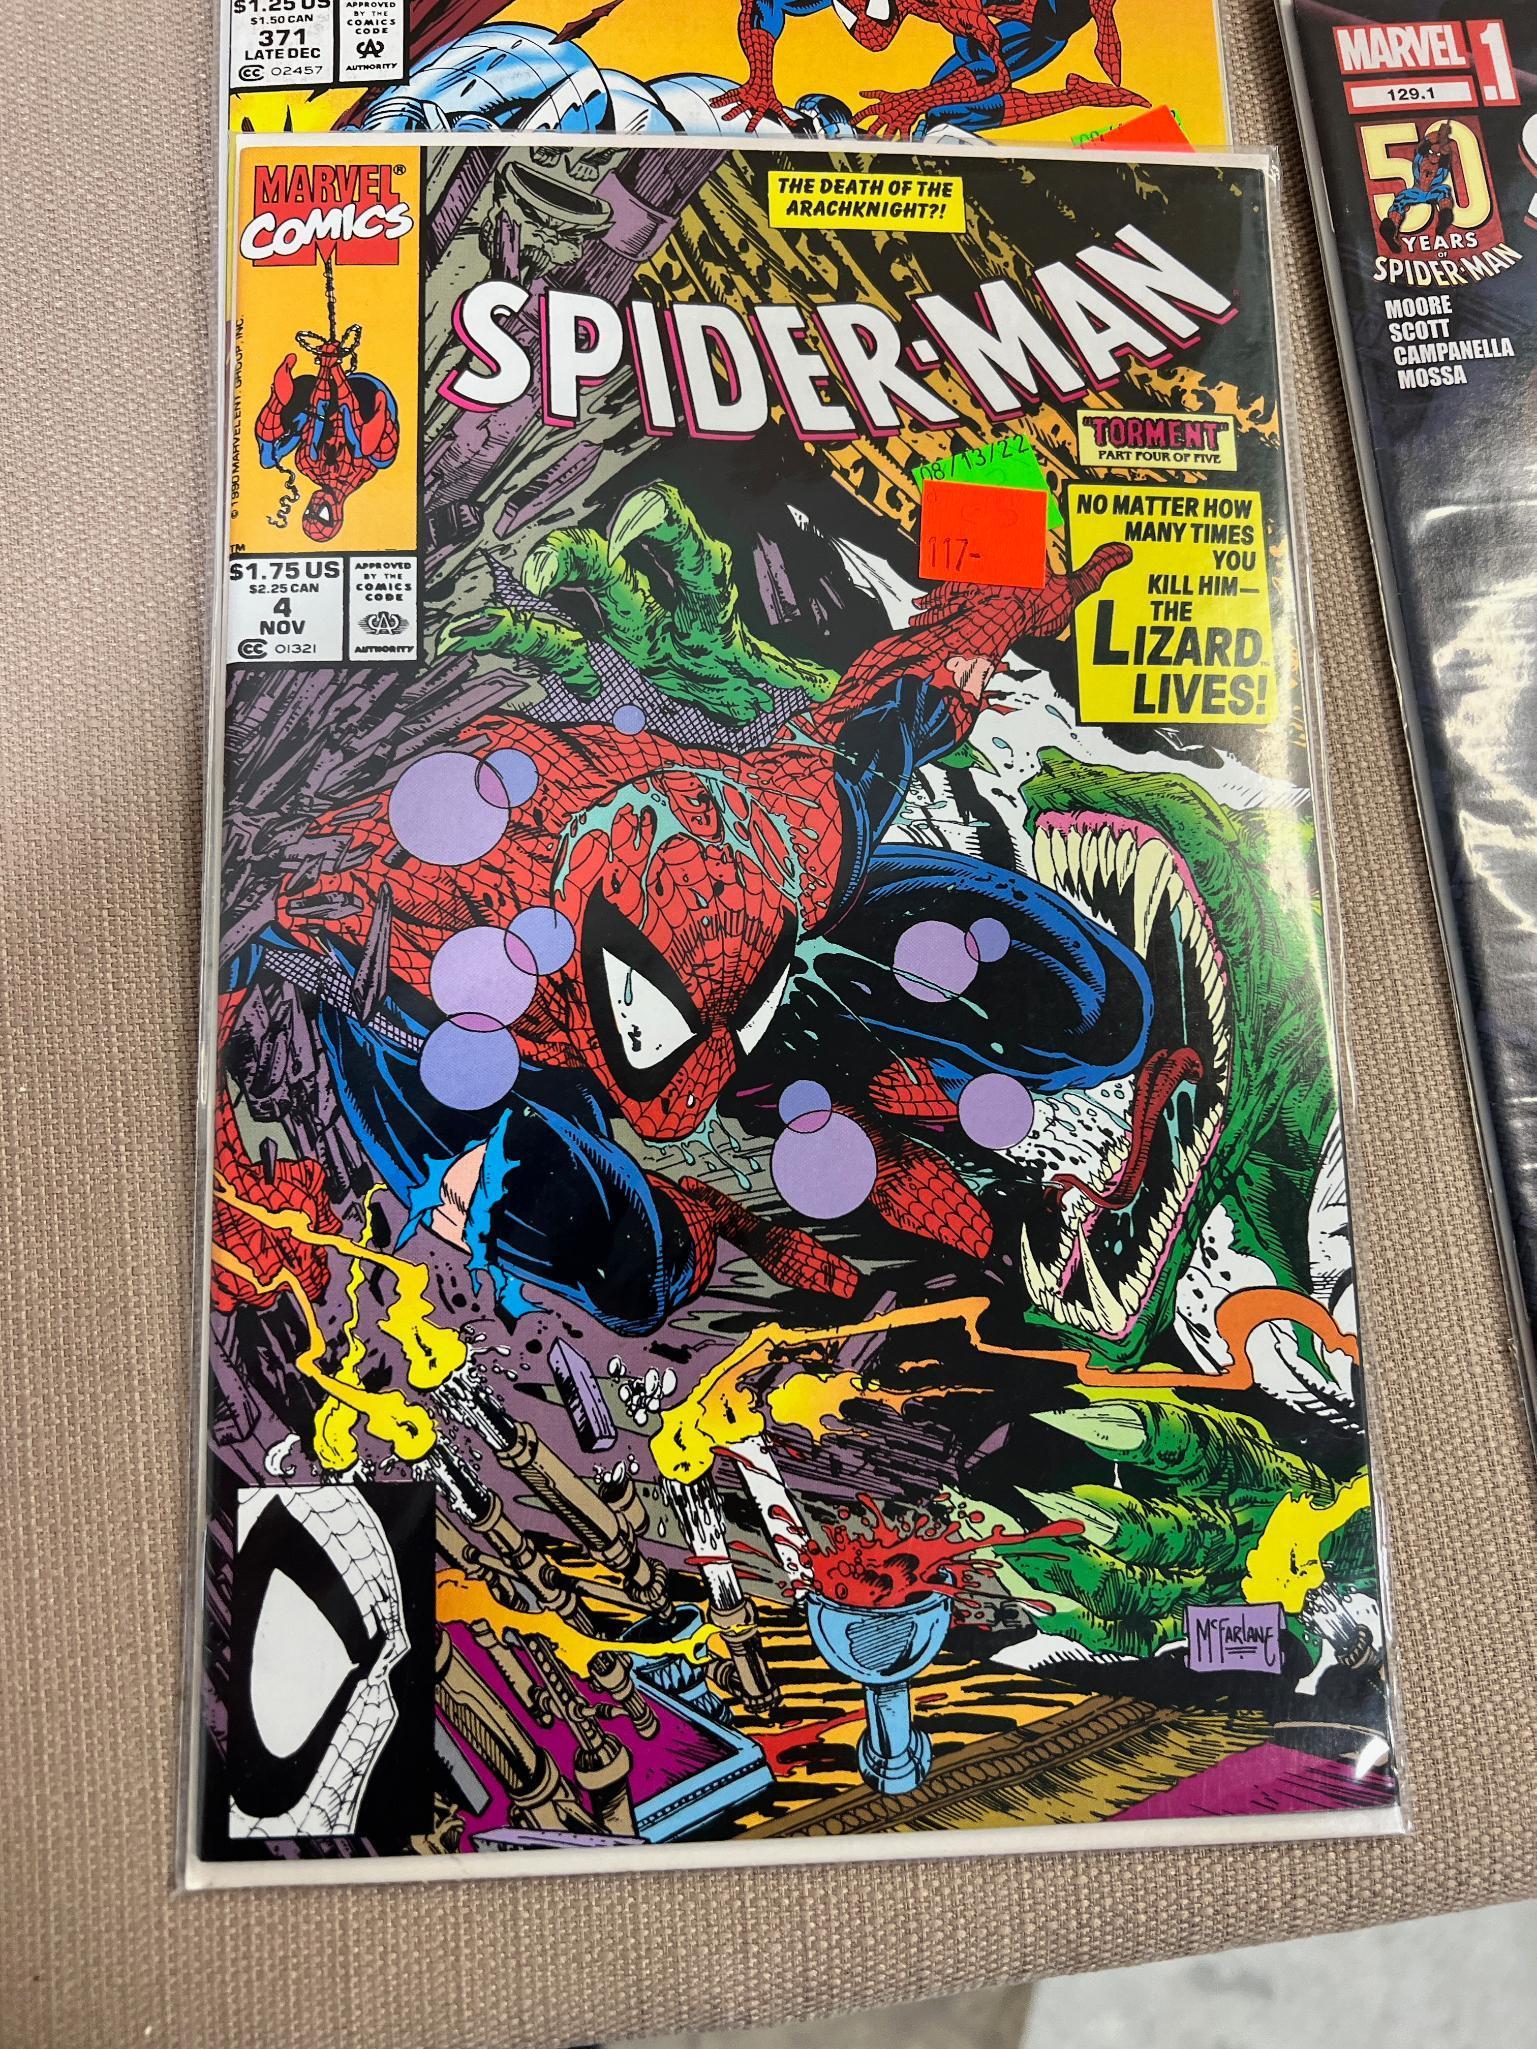 25- Spiderman and Spiderman Related Comic Books, nice mix, see pics